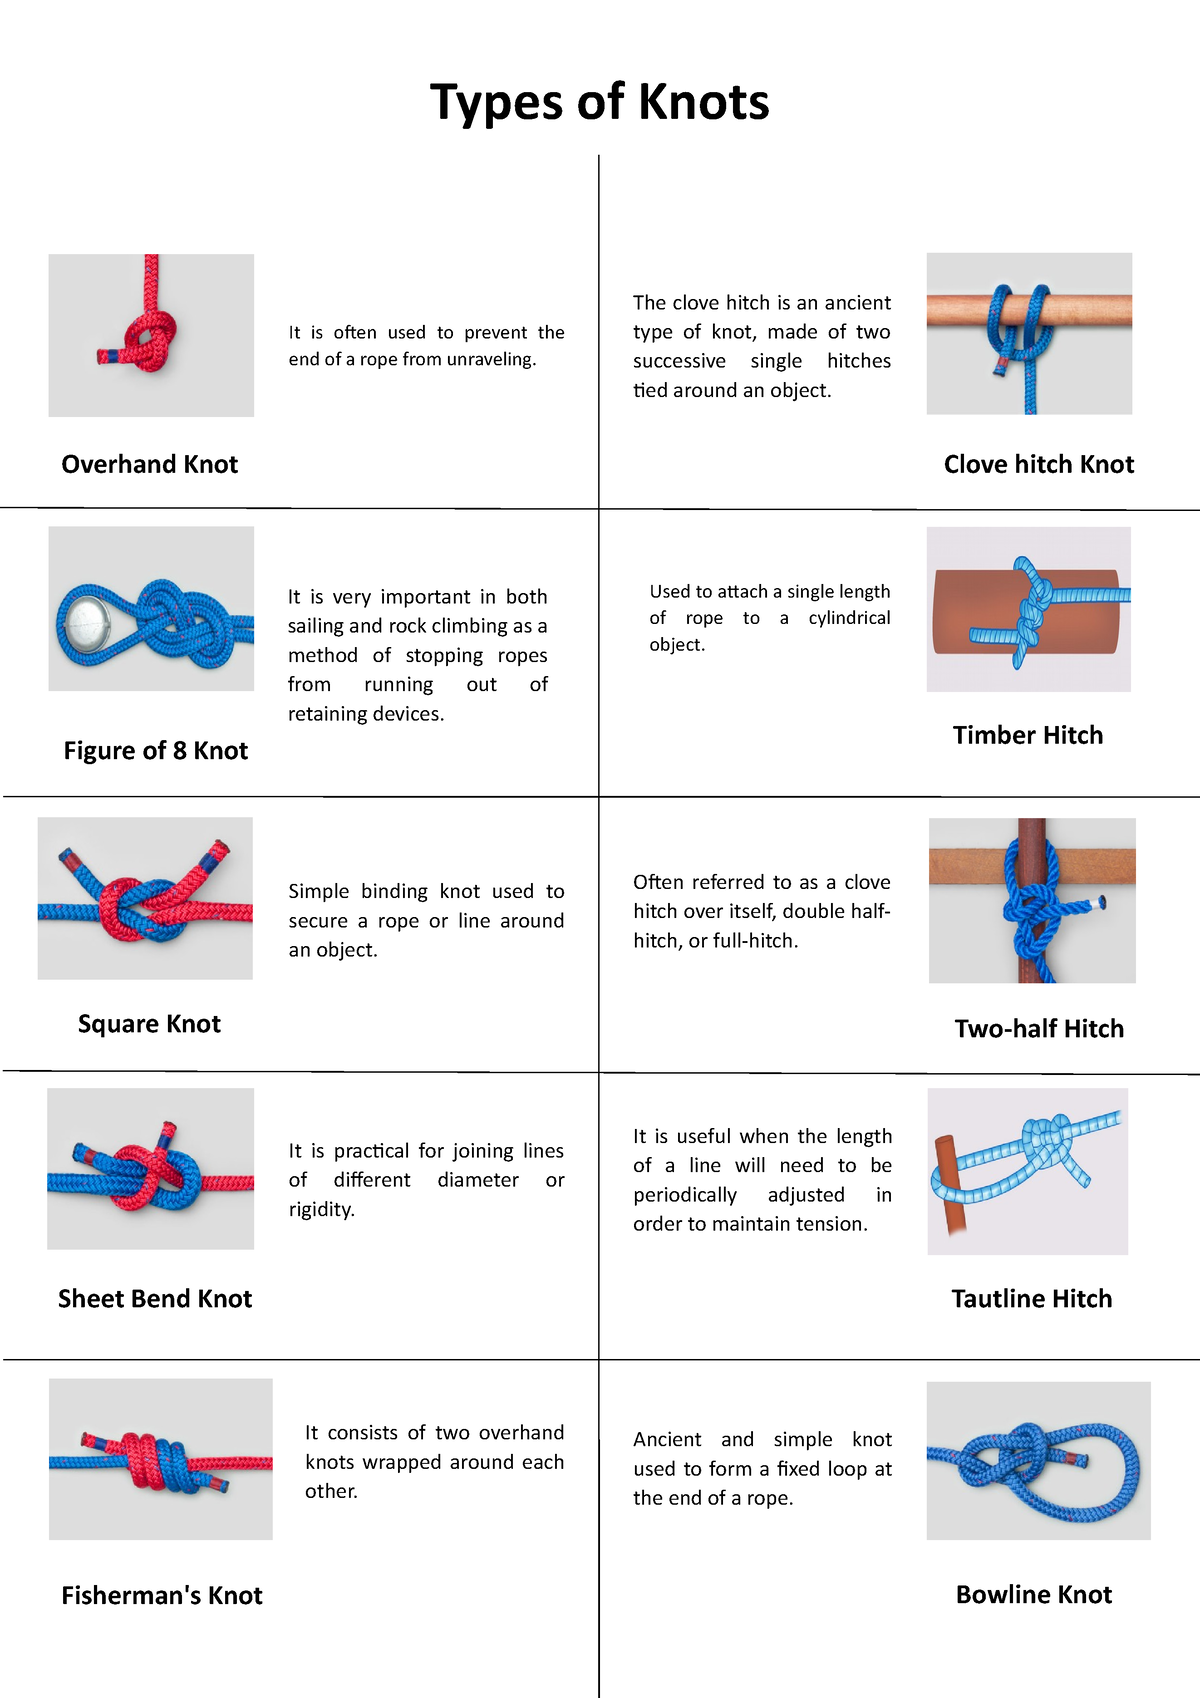 Types of Knot - awdadsad - Types of Knots Bowline Knot Timber Hitch  Two-half Hitch Tautline Hitch It - Studocu